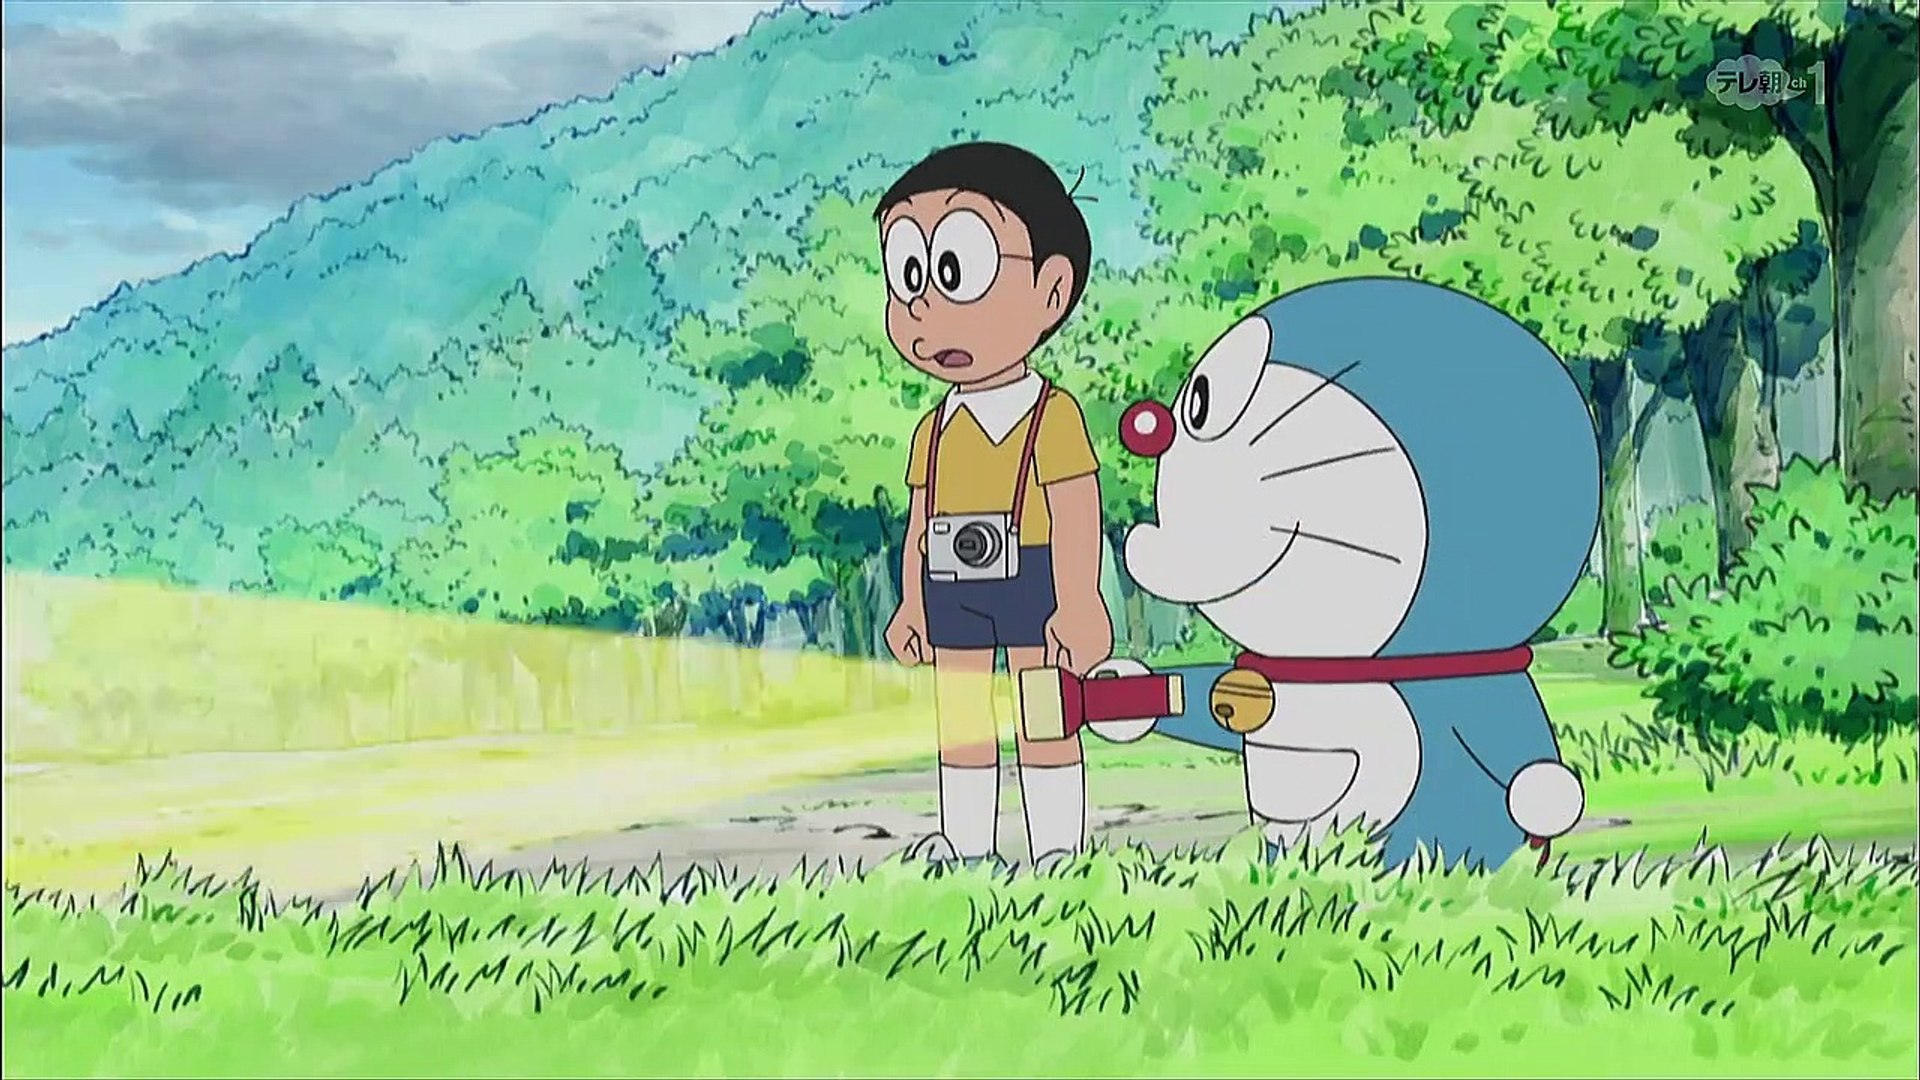 Doraemon by TS Movies - Dailymotion